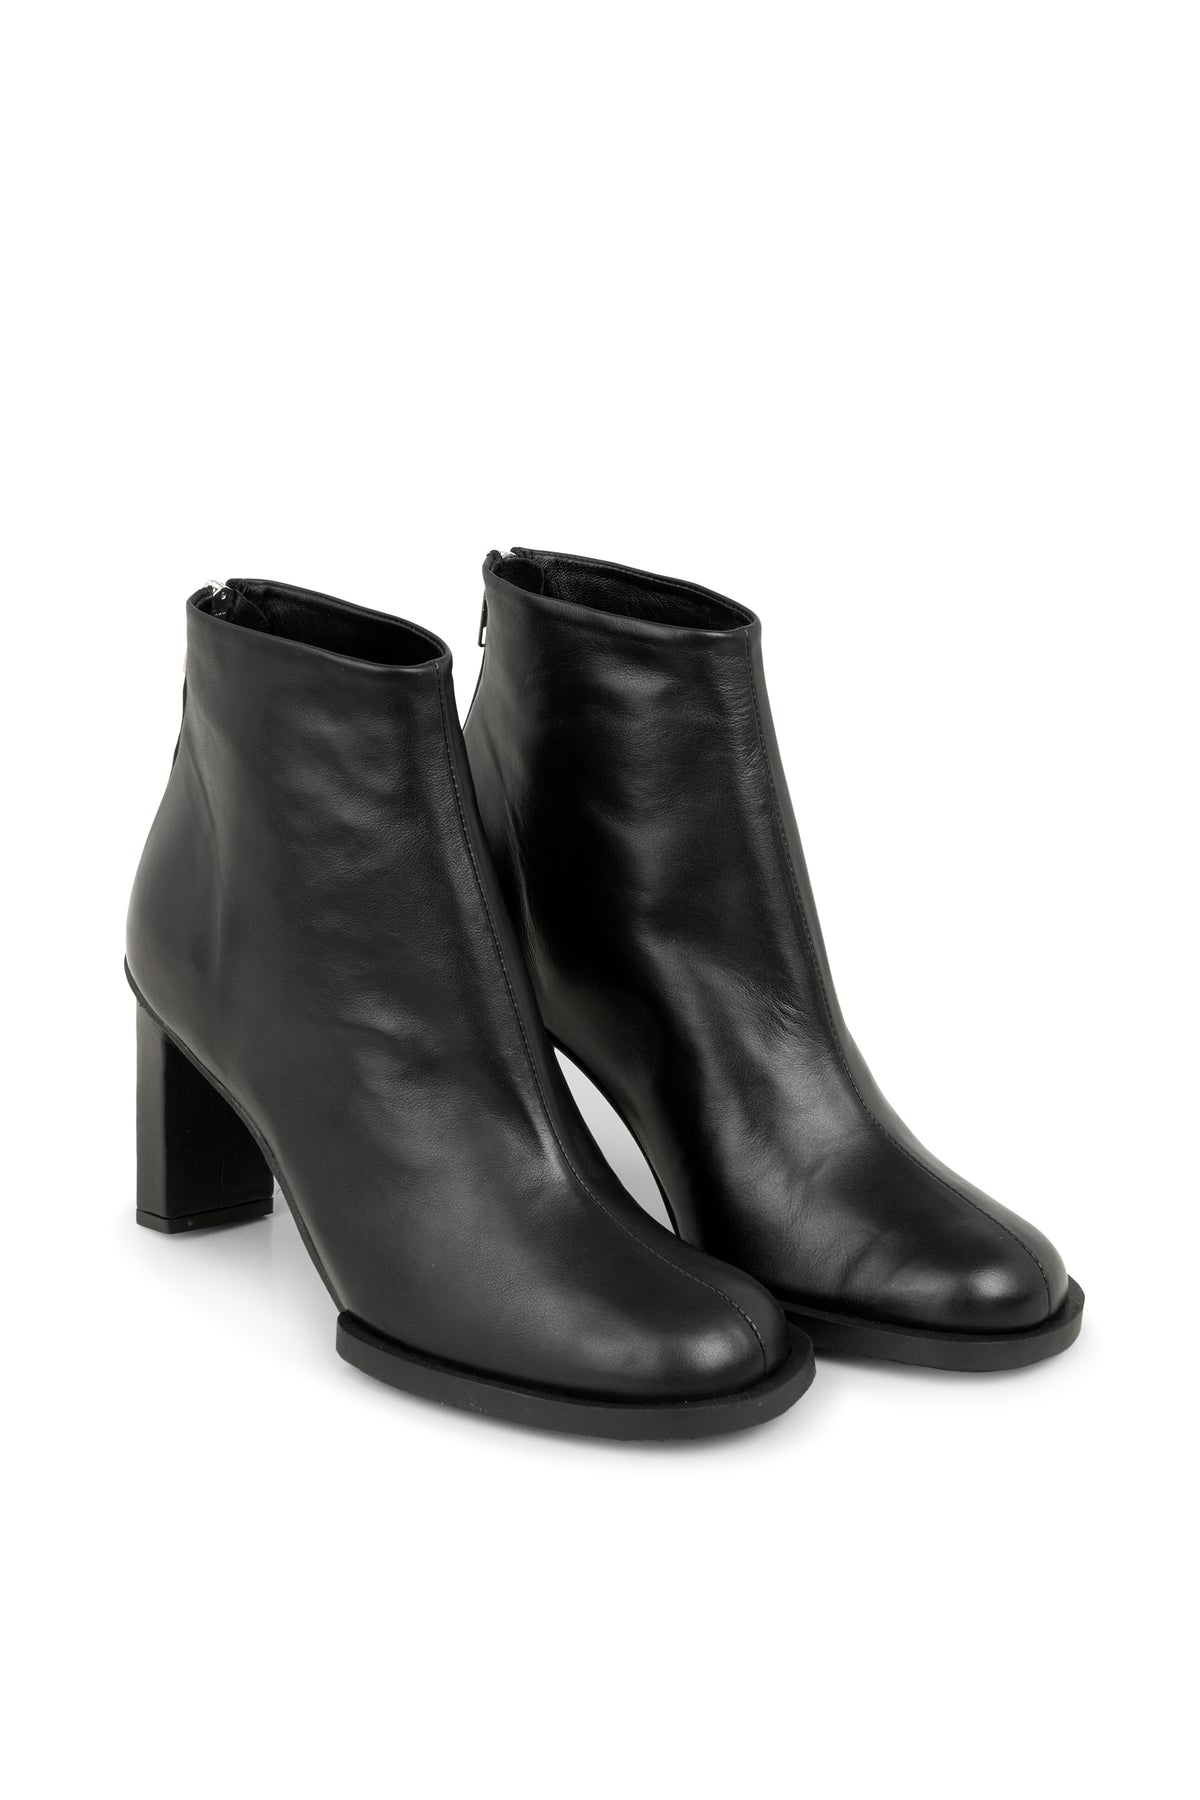 black leather heeled boot with rubber sole and rear zip detail